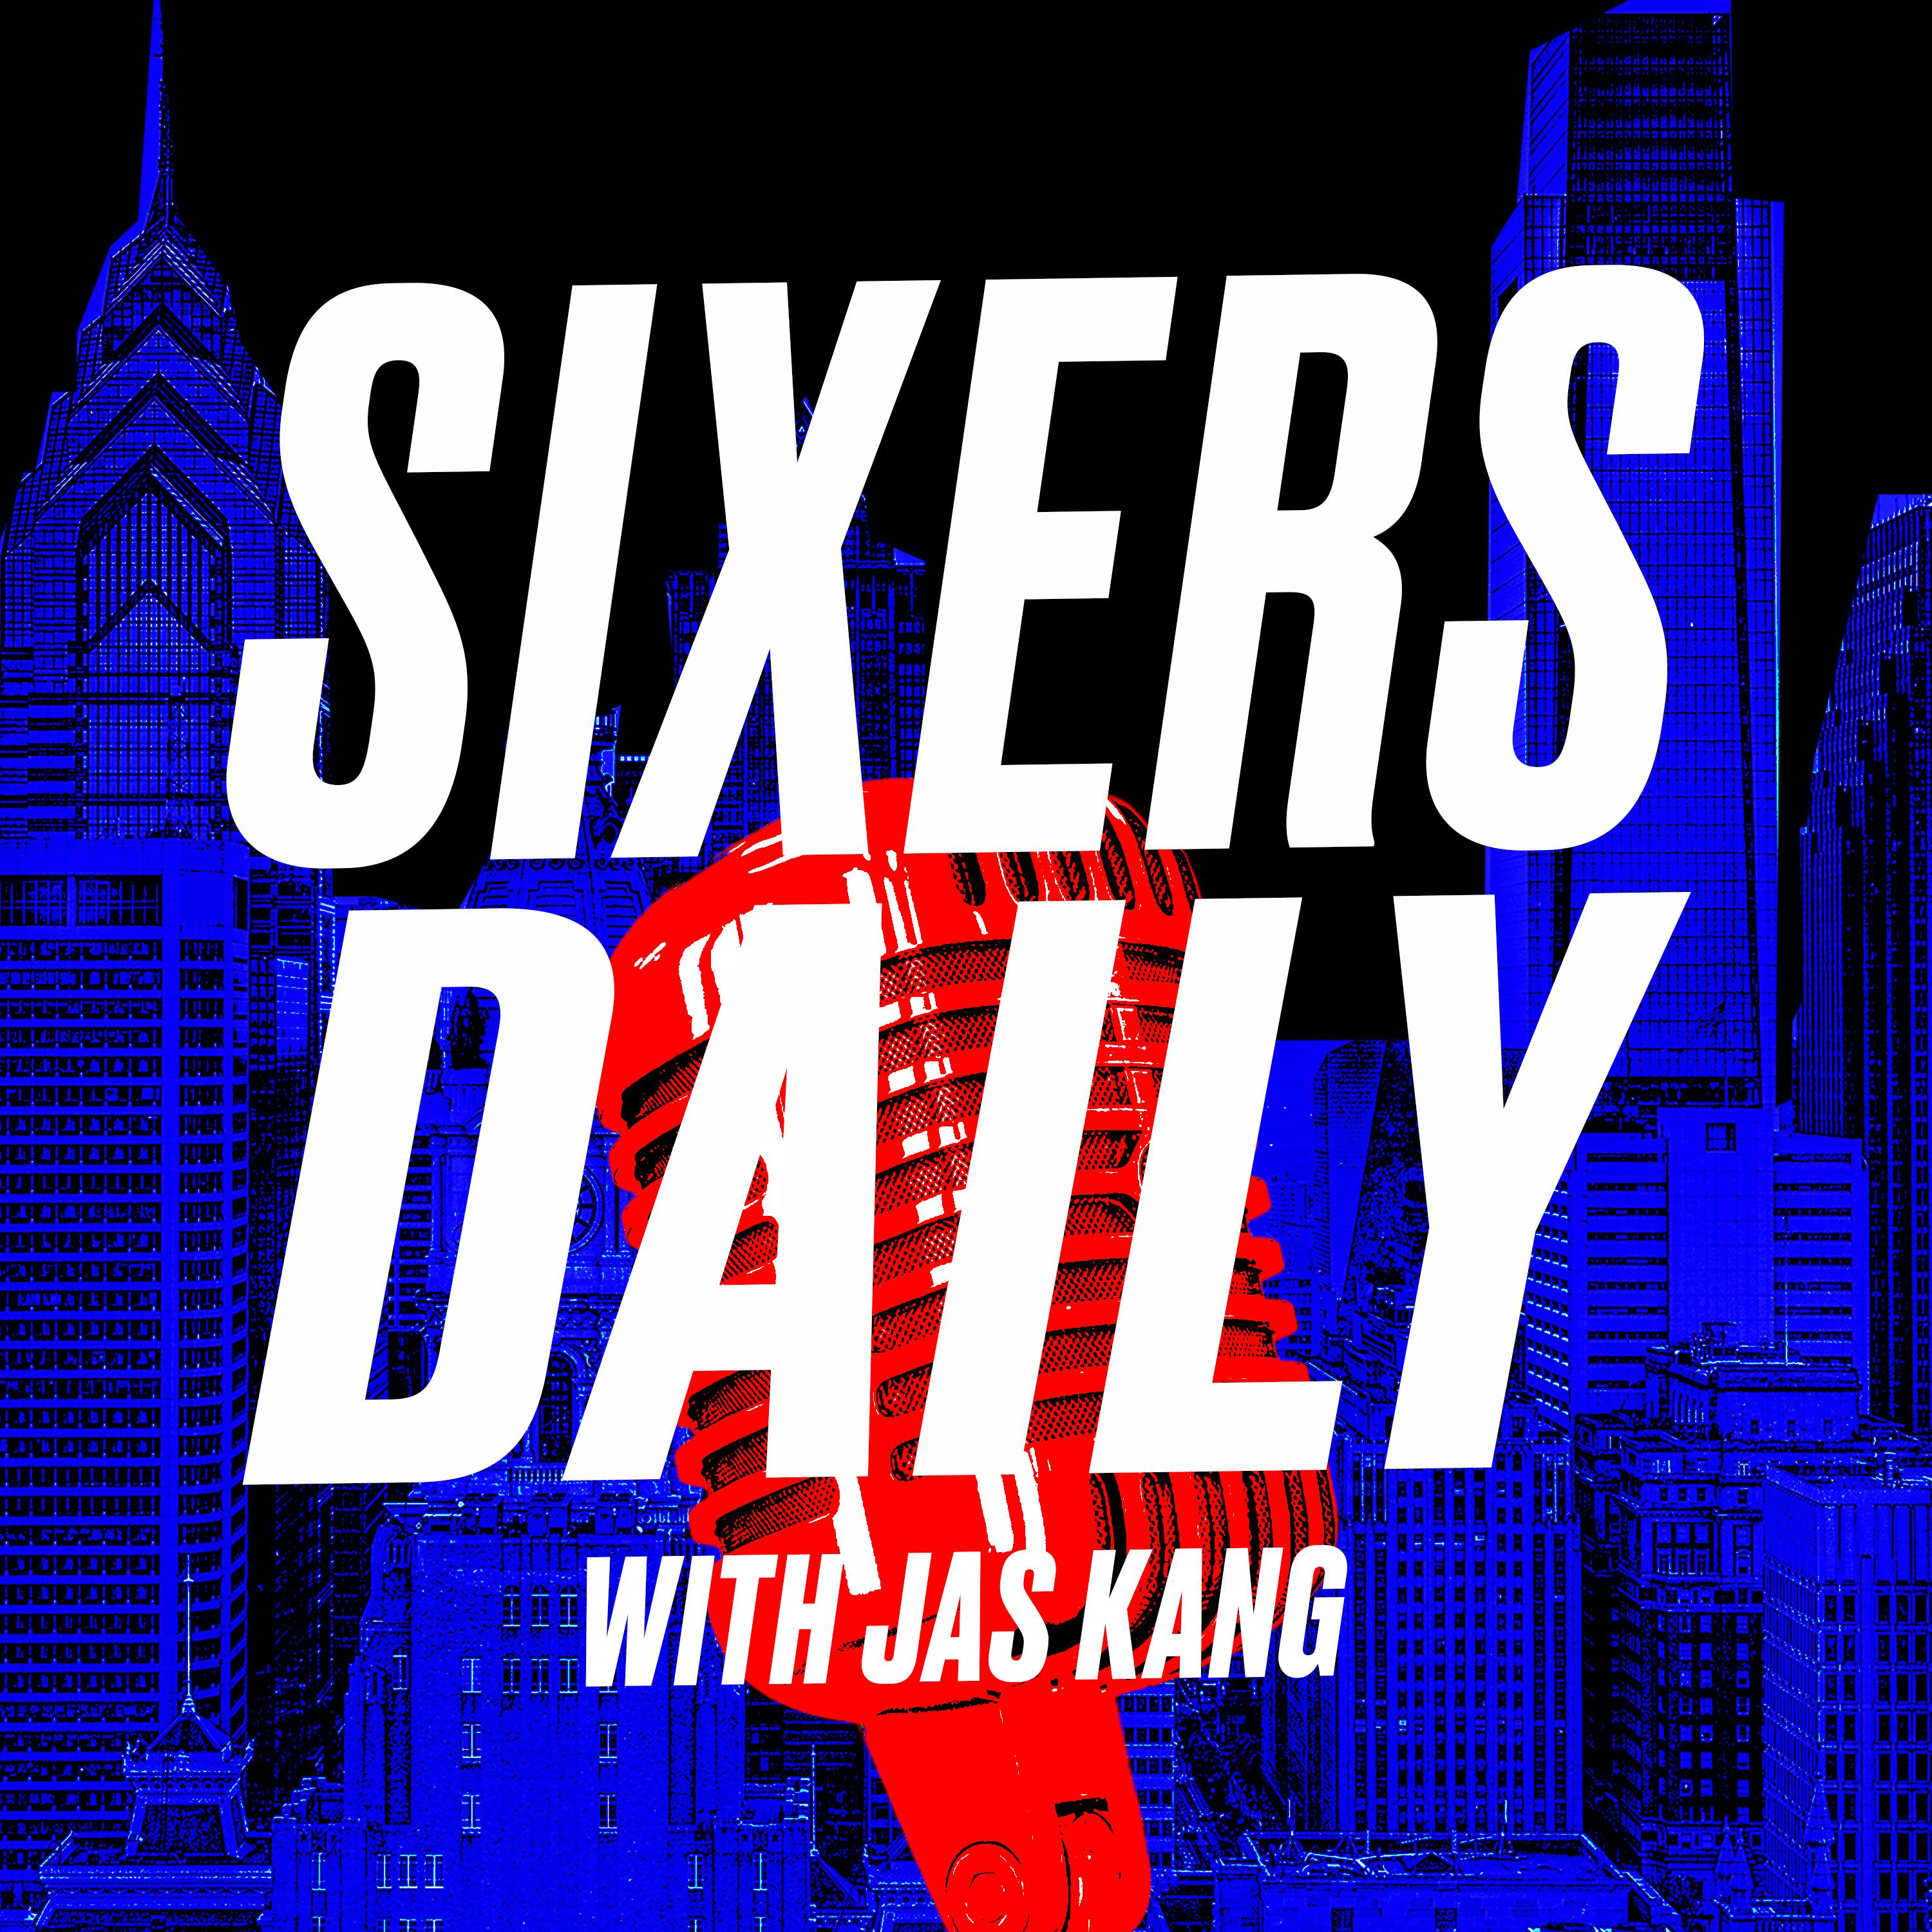 Sixers Daily with Jas Kang - Kevin Durant is reportedly open to playing for Philly, what would it cost to get him? Plus, what are expectations for James Harden next season? With Jackson Frank.